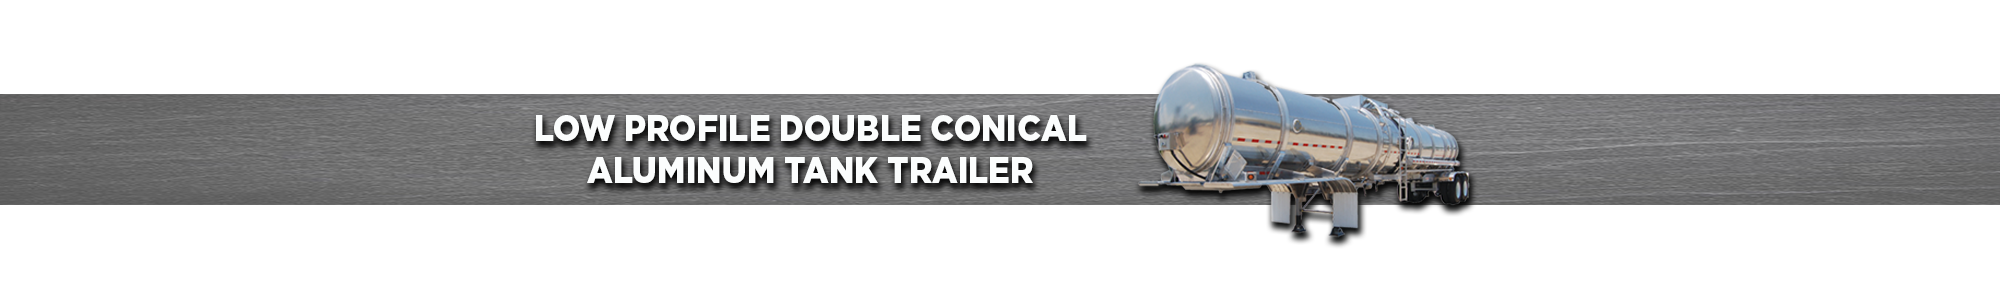 Low-Profile Double Conical Tanker Trailer